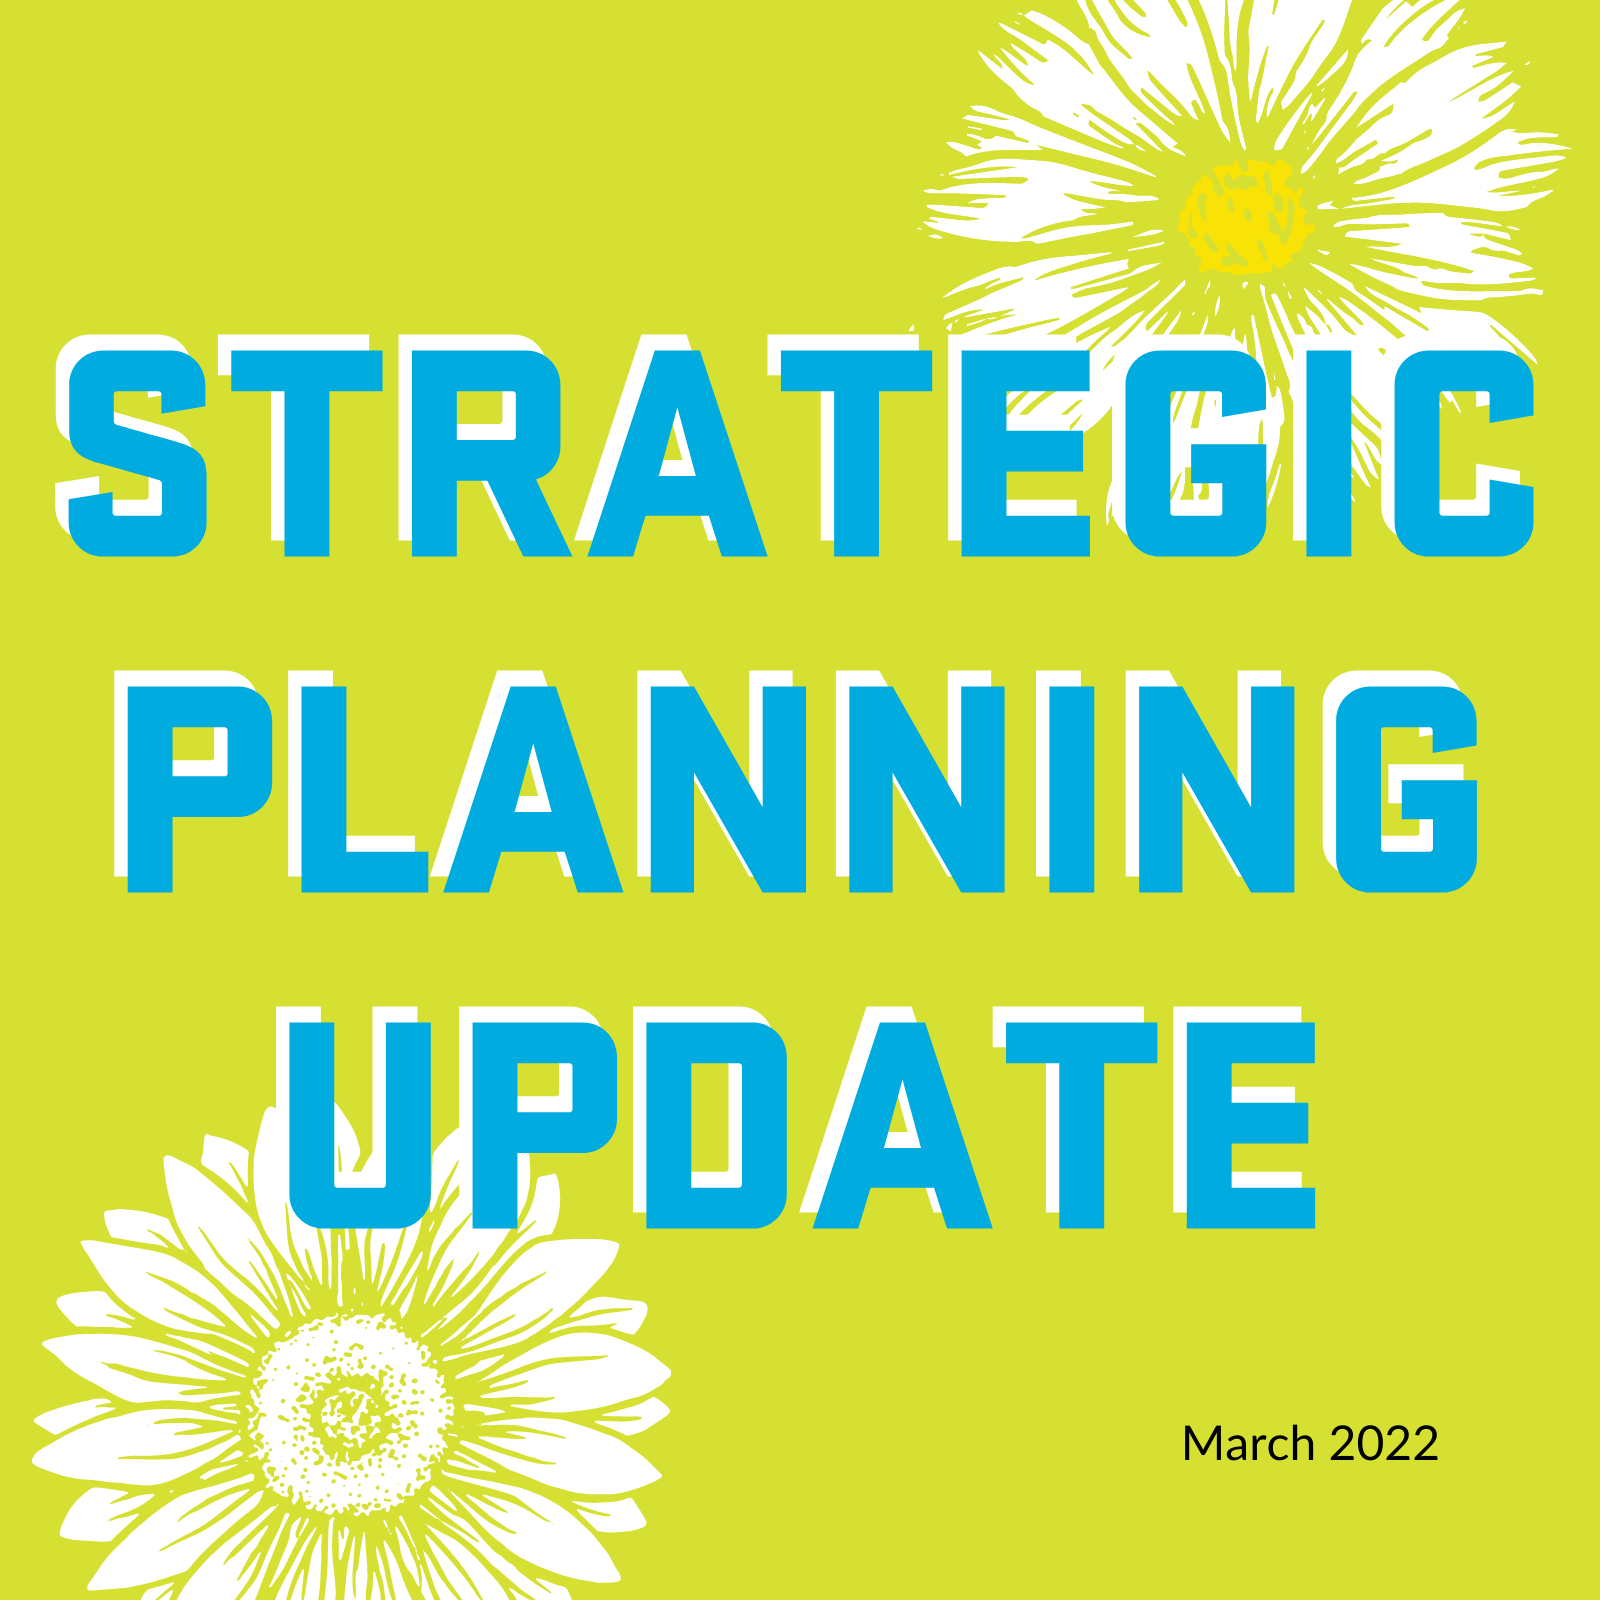 The next five years: A strategic planning update